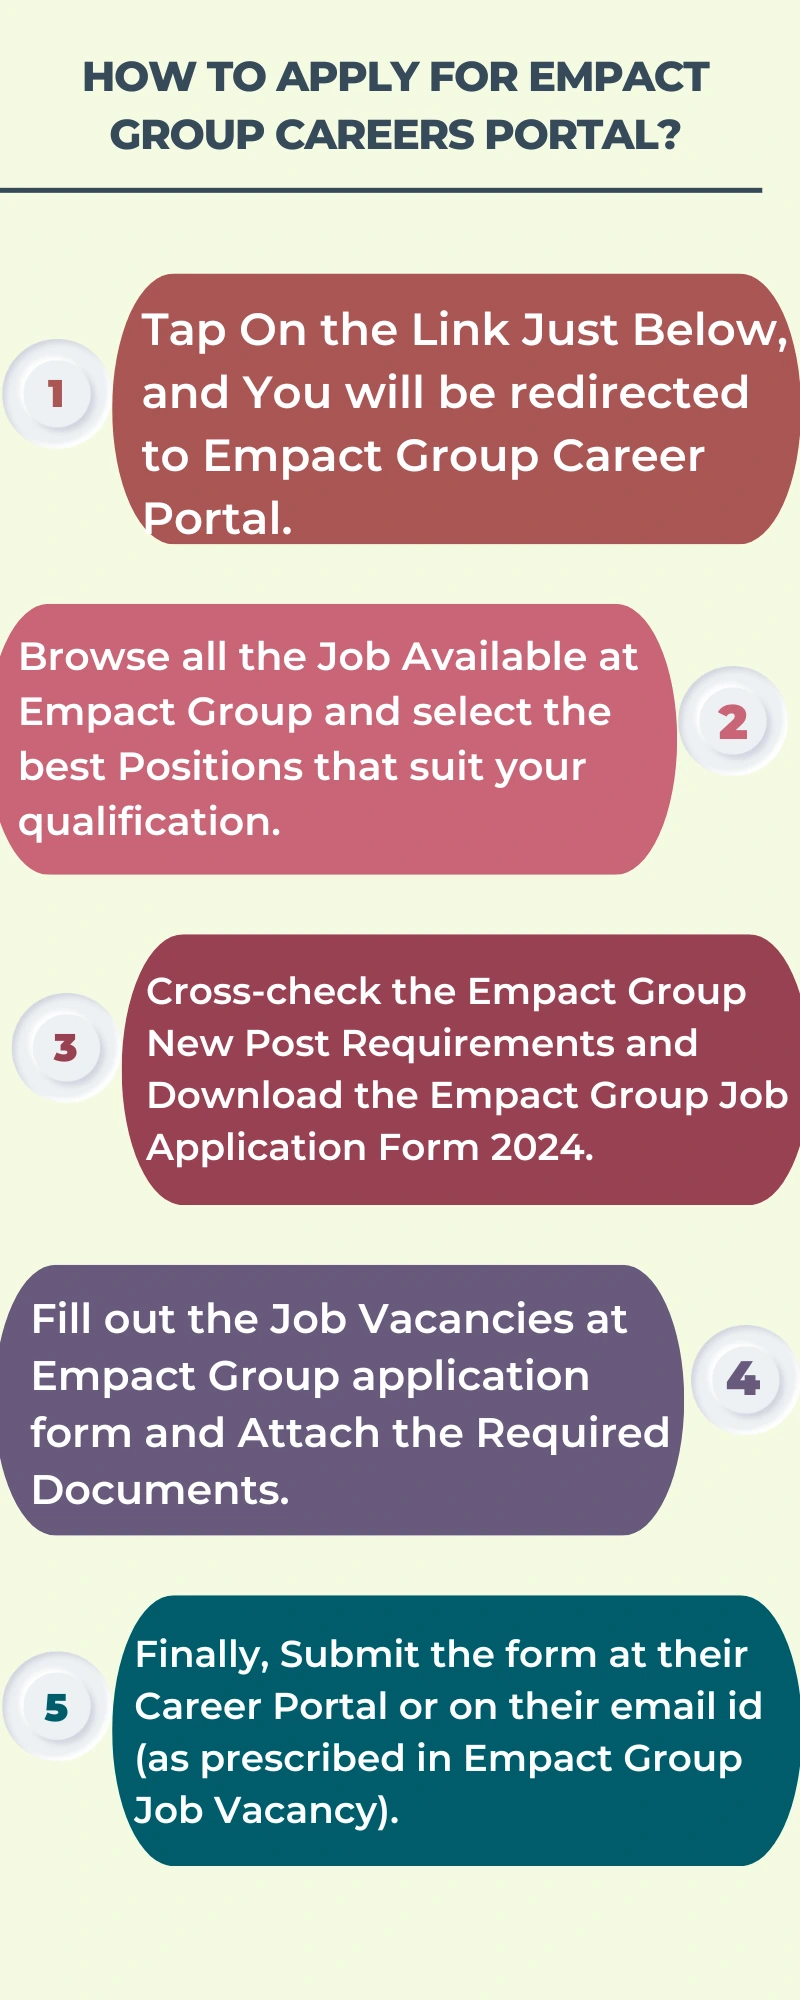 How To Apply for Empact Group Careers Portal?